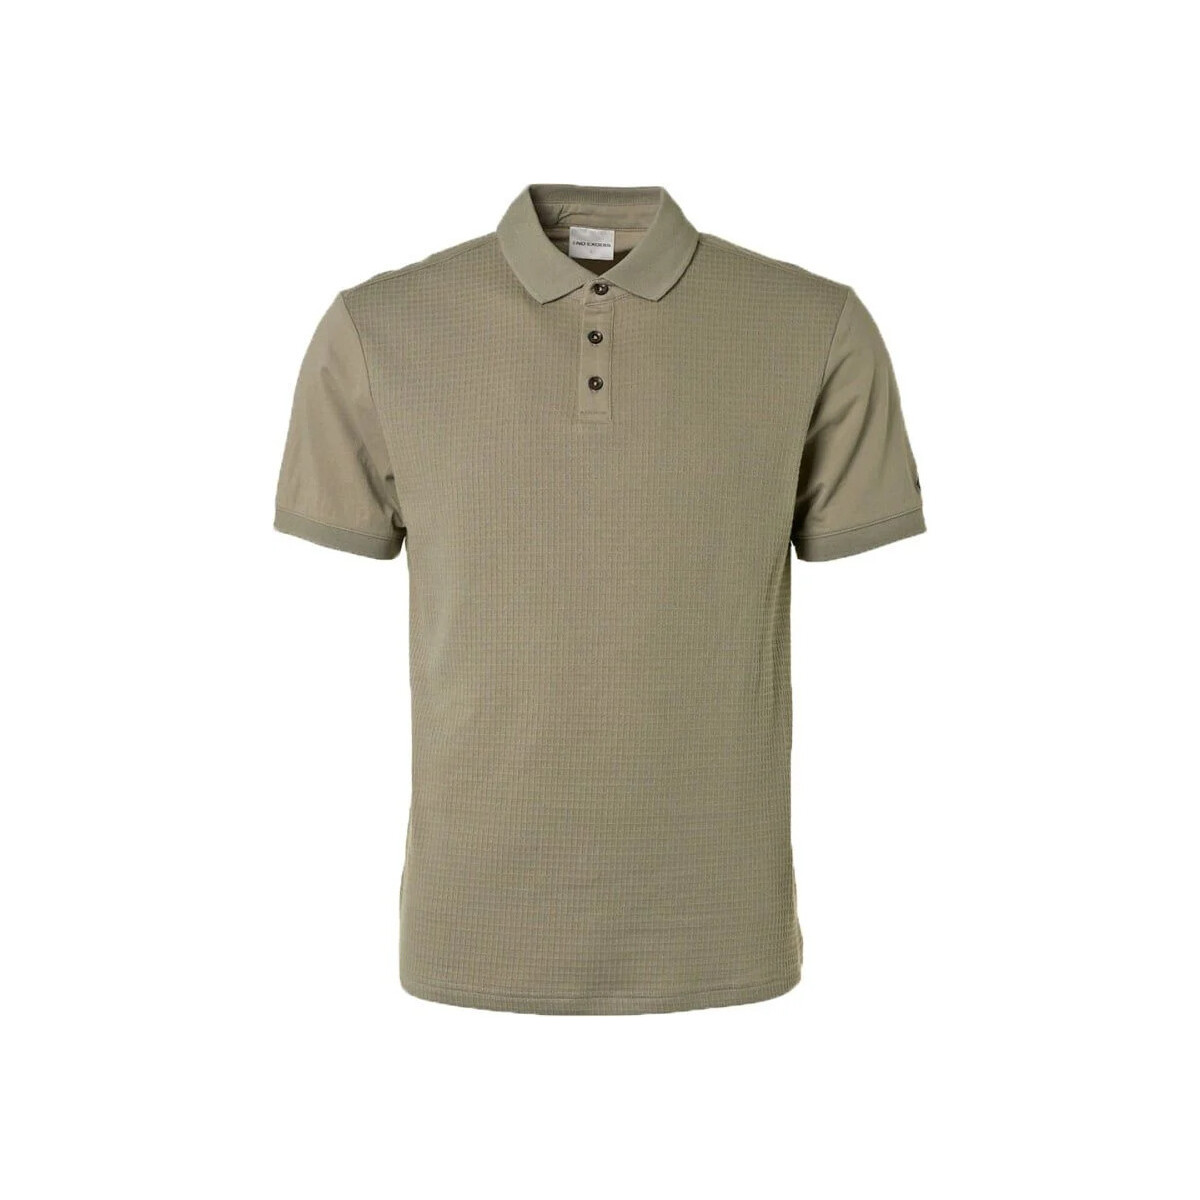 Vêtements Homme T-shirts & Polos No Excess Polo No-Excess Vert Army Vert